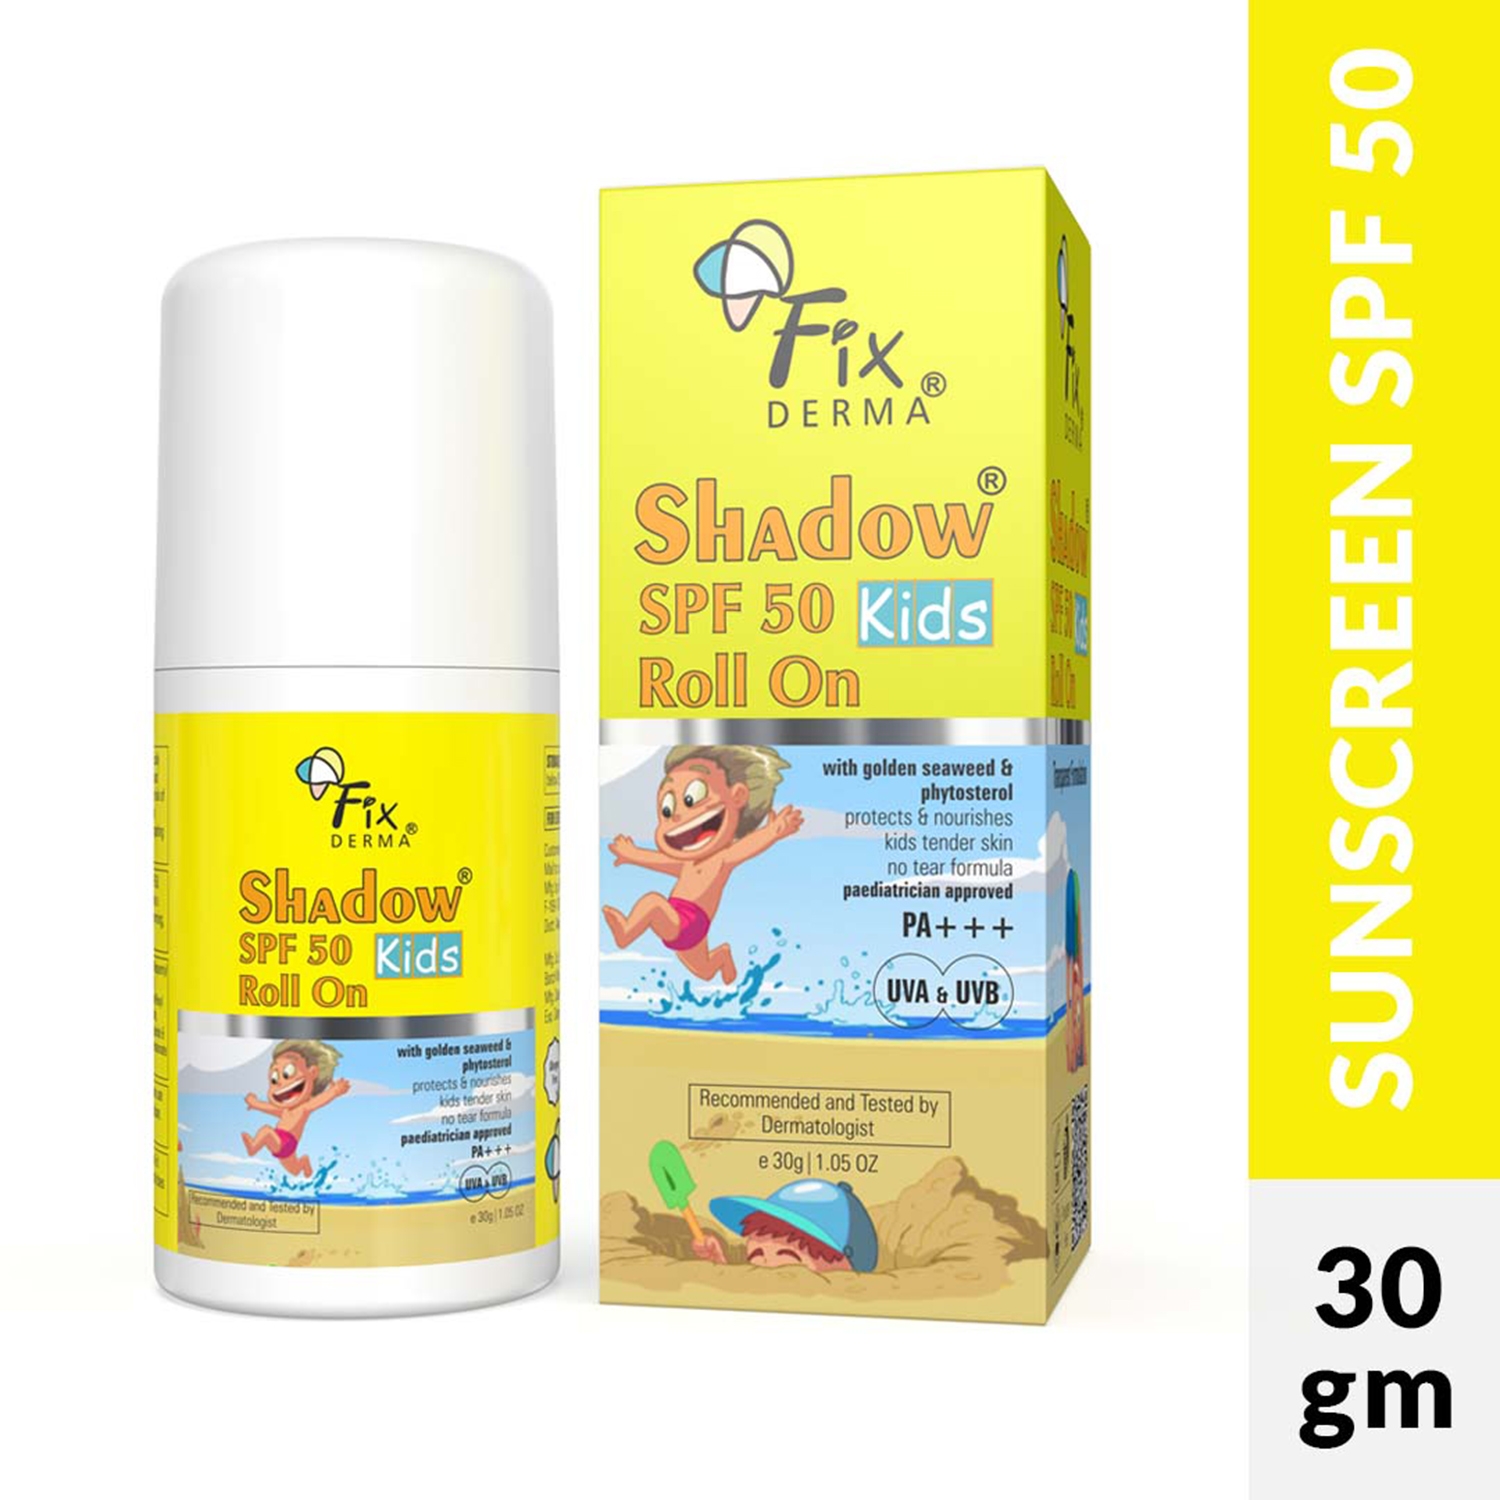 Fixderma | Fixderma Shadow Kids Roll On Sunscreen for Kids SPF 50 with Golden Seaweed & Phytosterol (30g)